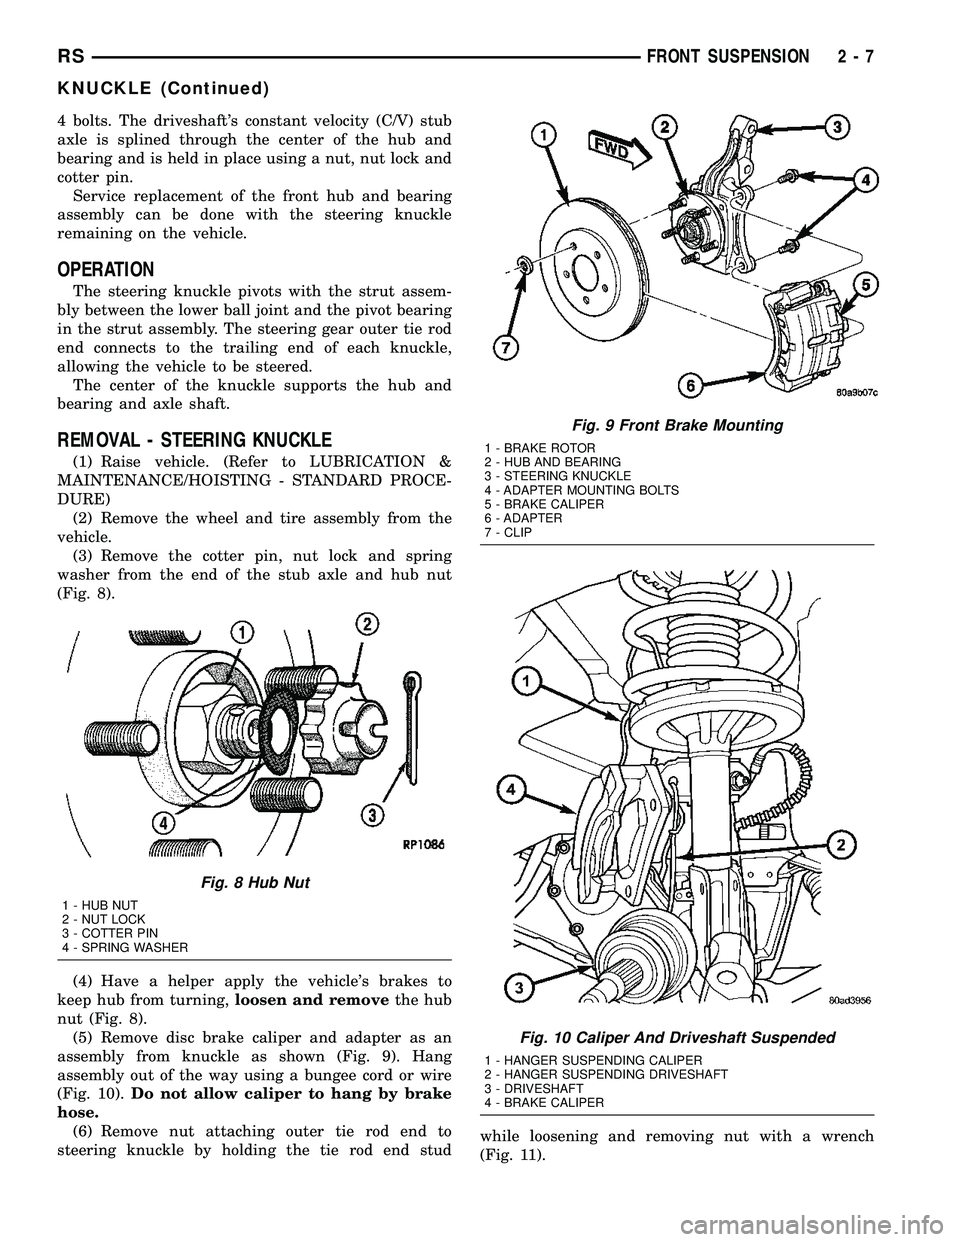 CHRYSLER CARAVAN 2005 Workshop Manual 4 bolts. The driveshafts constant velocity (C/V) stub
axle is splined through the center of the hub and
bearing and is held in place using a nut, nut lock and
cotter pin.
Service replacement of the f